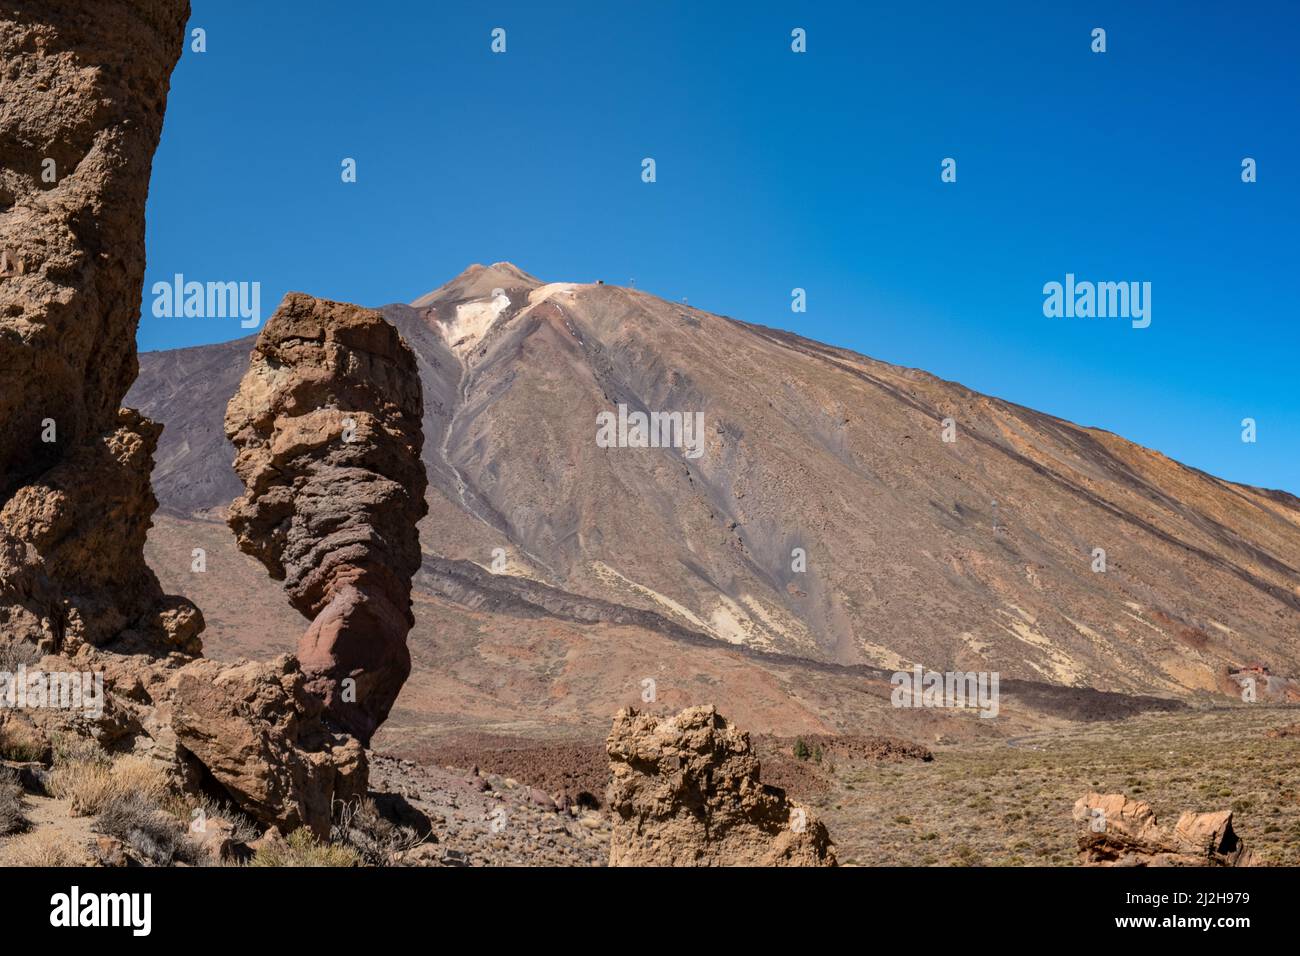 Teide National Park Tenerife with Volcano and the rock formation, called Finger of god. Stock Photo